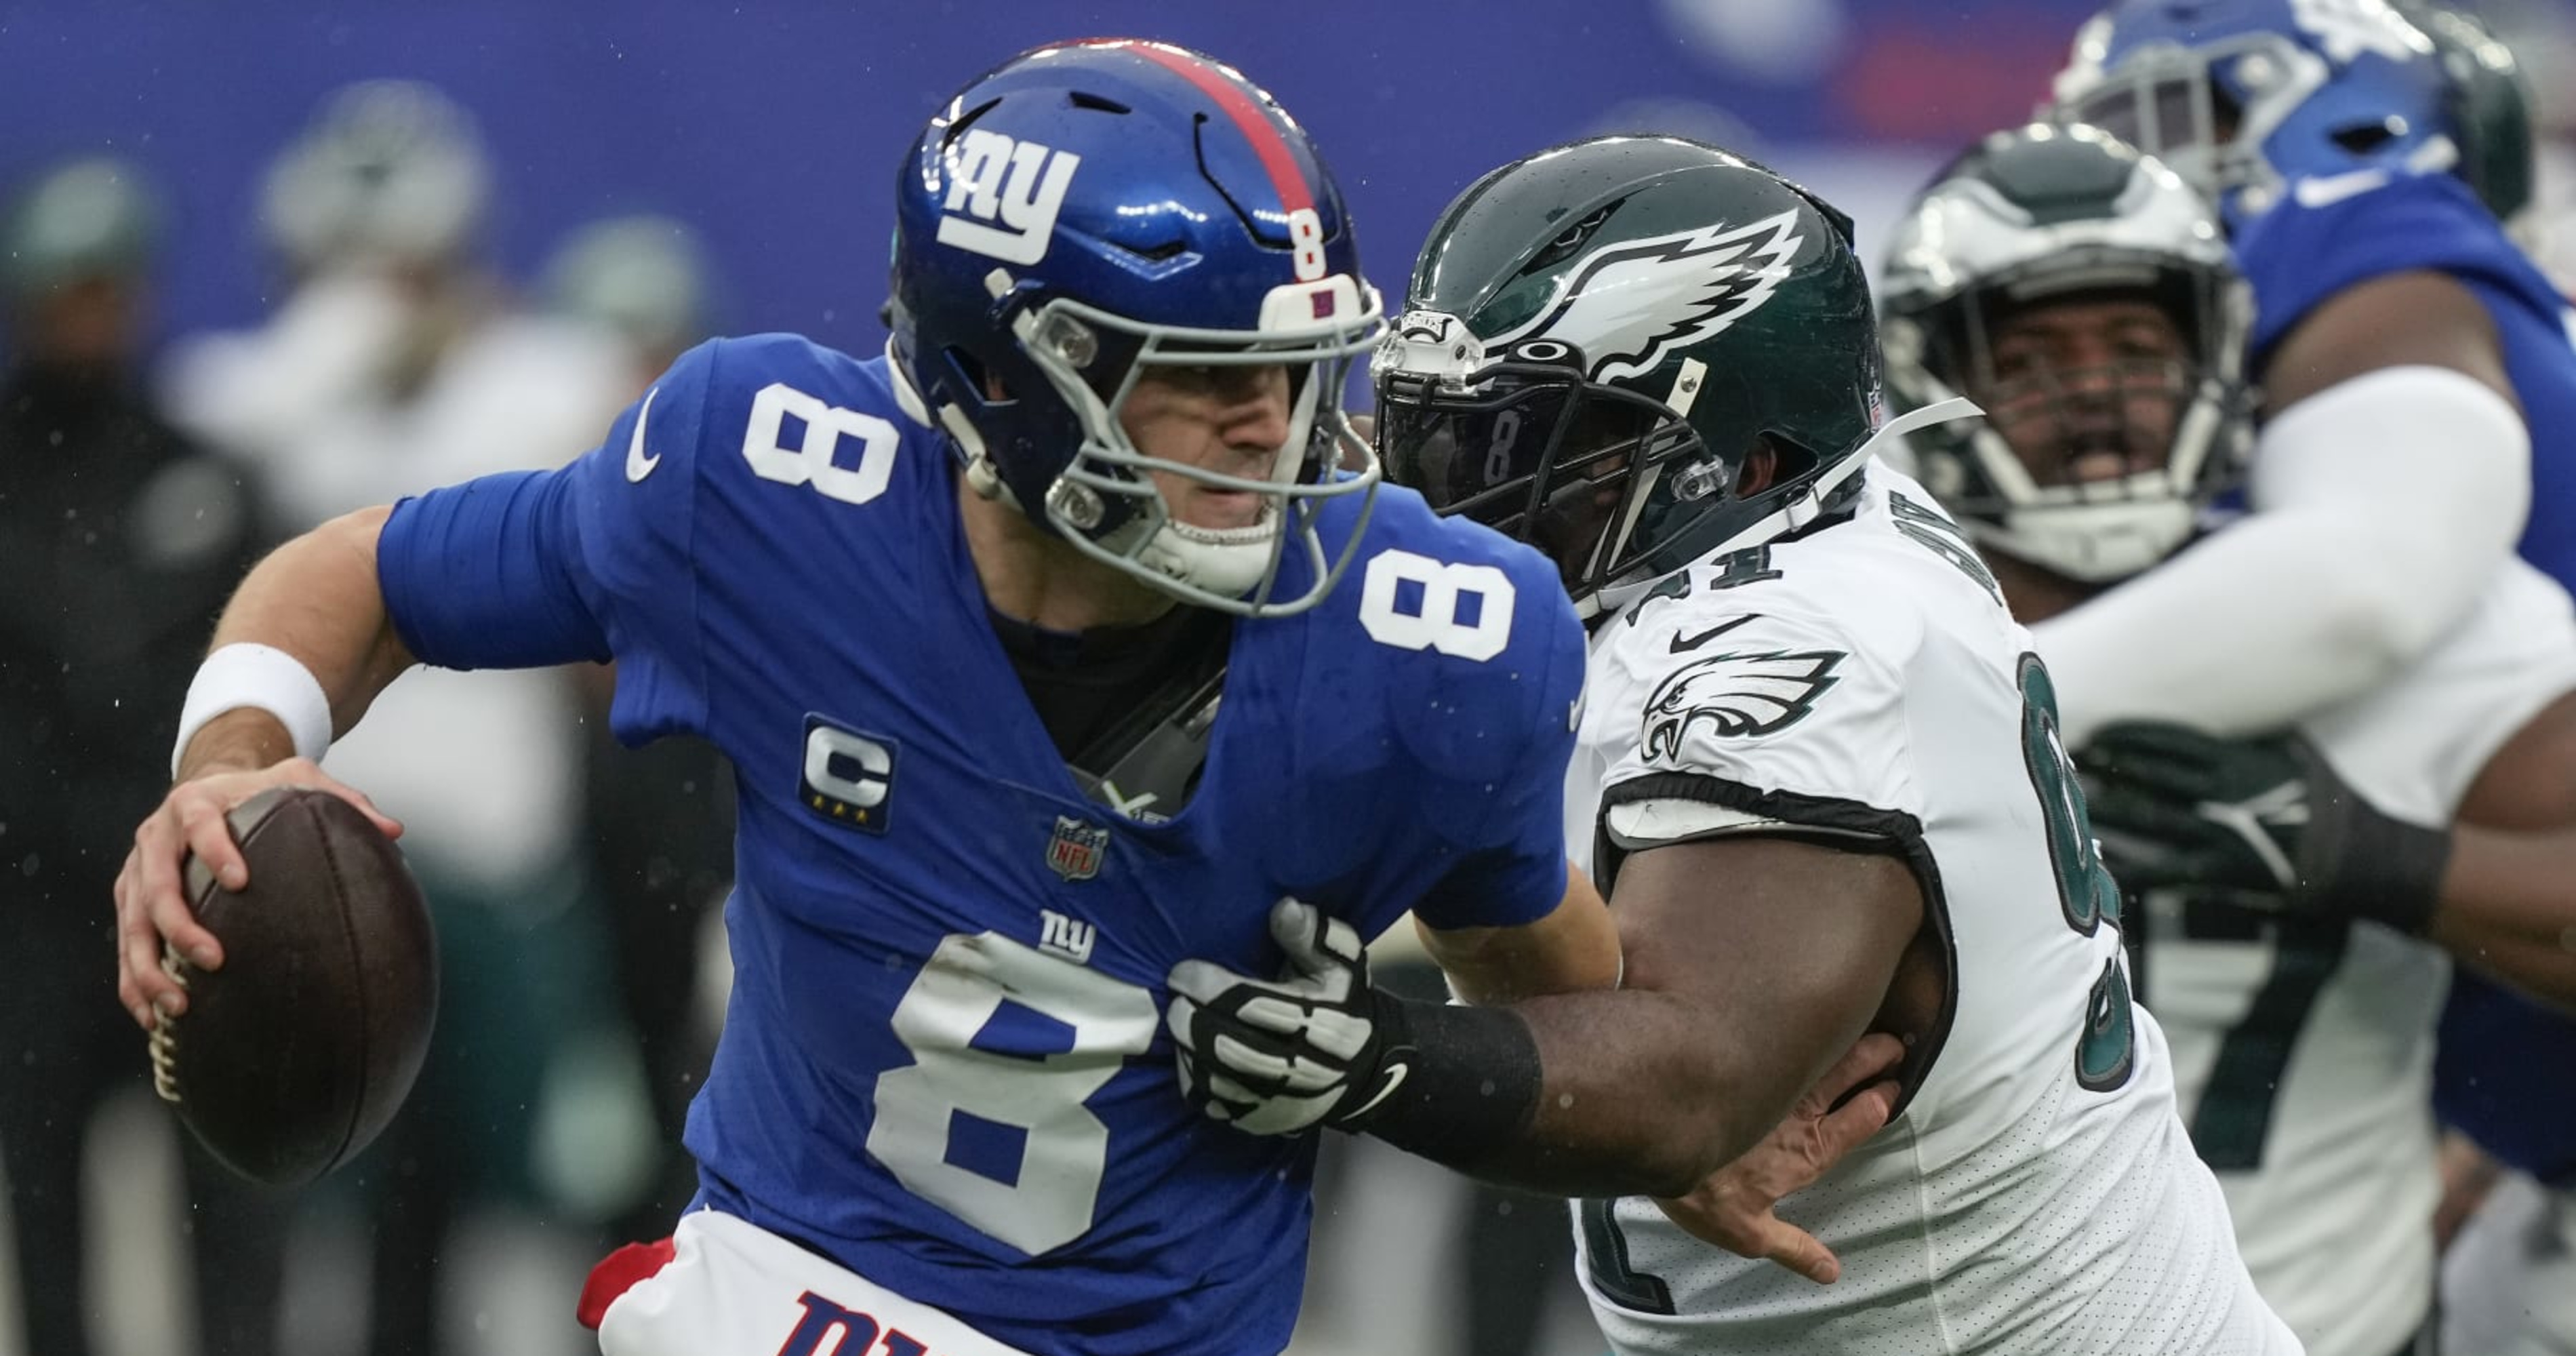 Eagles-Giants game in Week 14 will NOT be flexed to Sunday Night